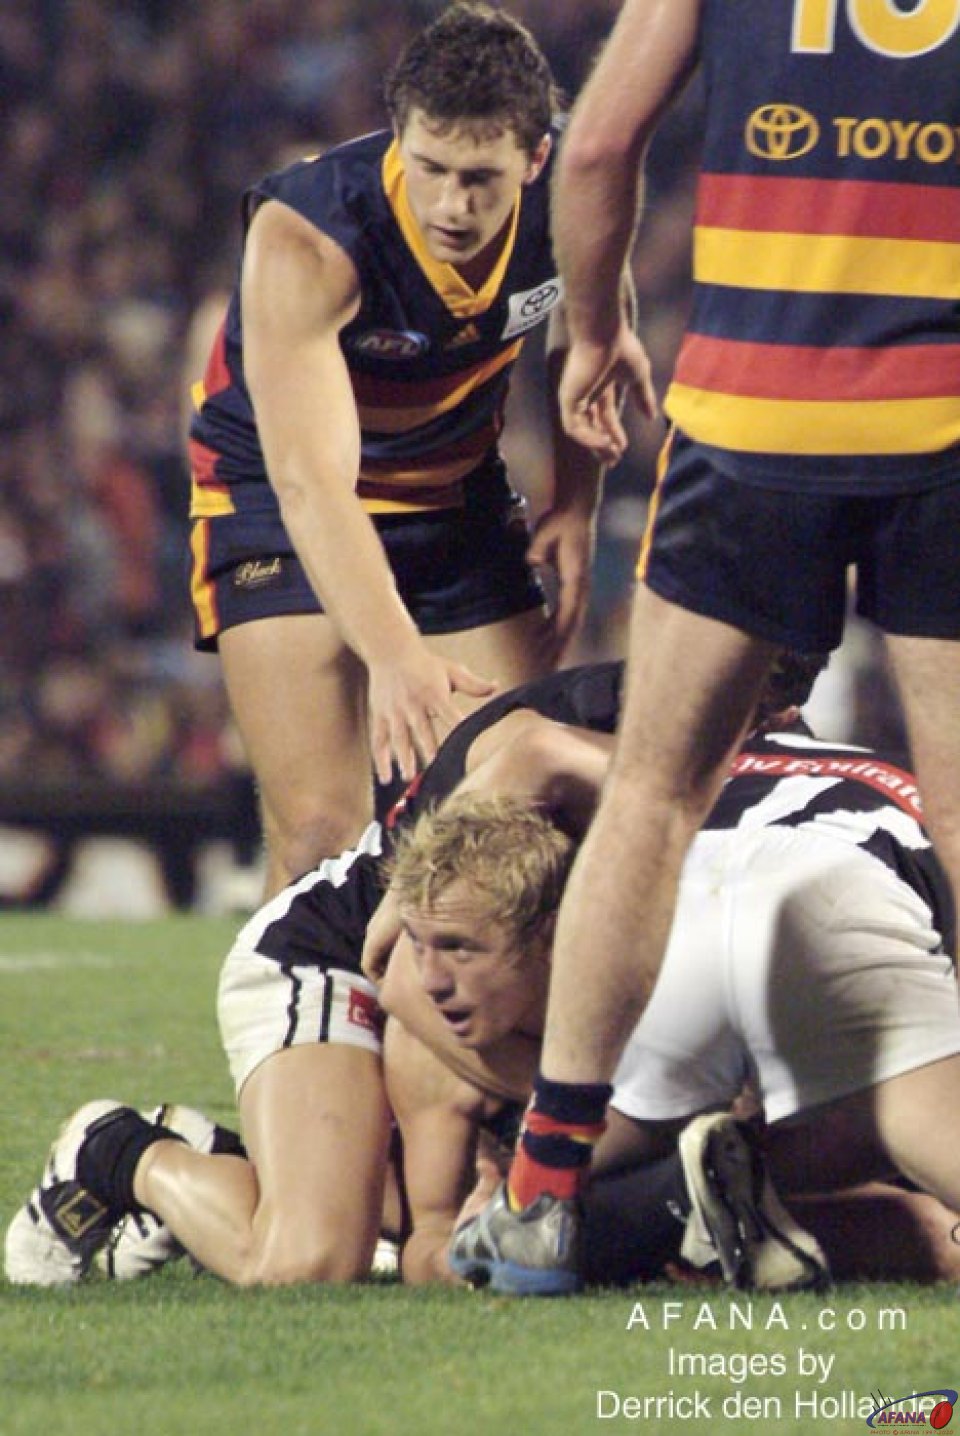 [b]The Crows Matthew Bode, typically scrambling under a pack of players at AAMI Stadium[/b]